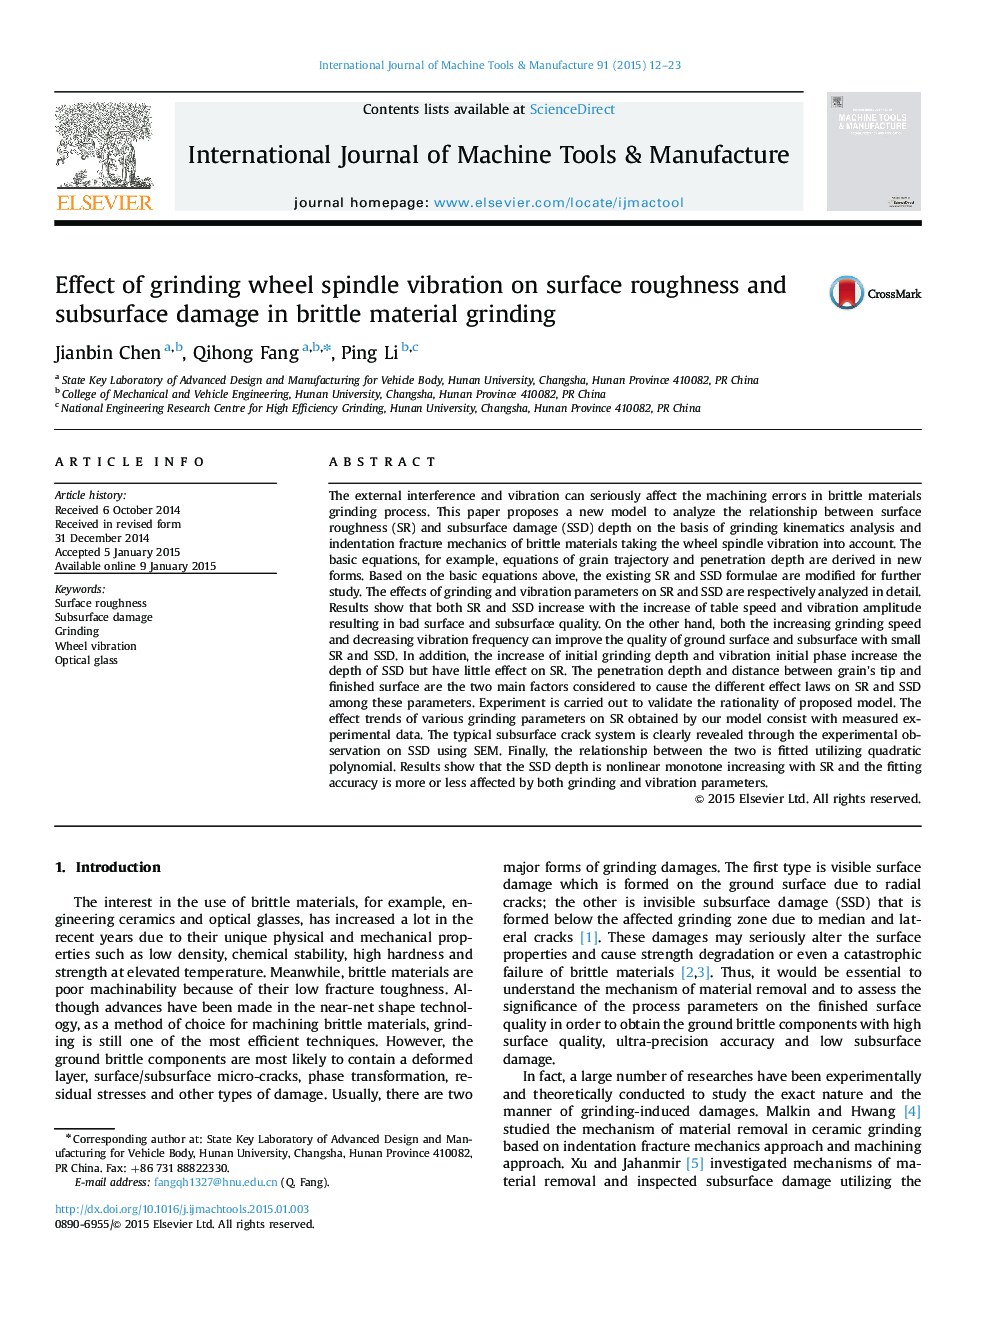 Effect of grinding wheel spindle vibration on surface roughness and subsurface damage in brittle material grinding